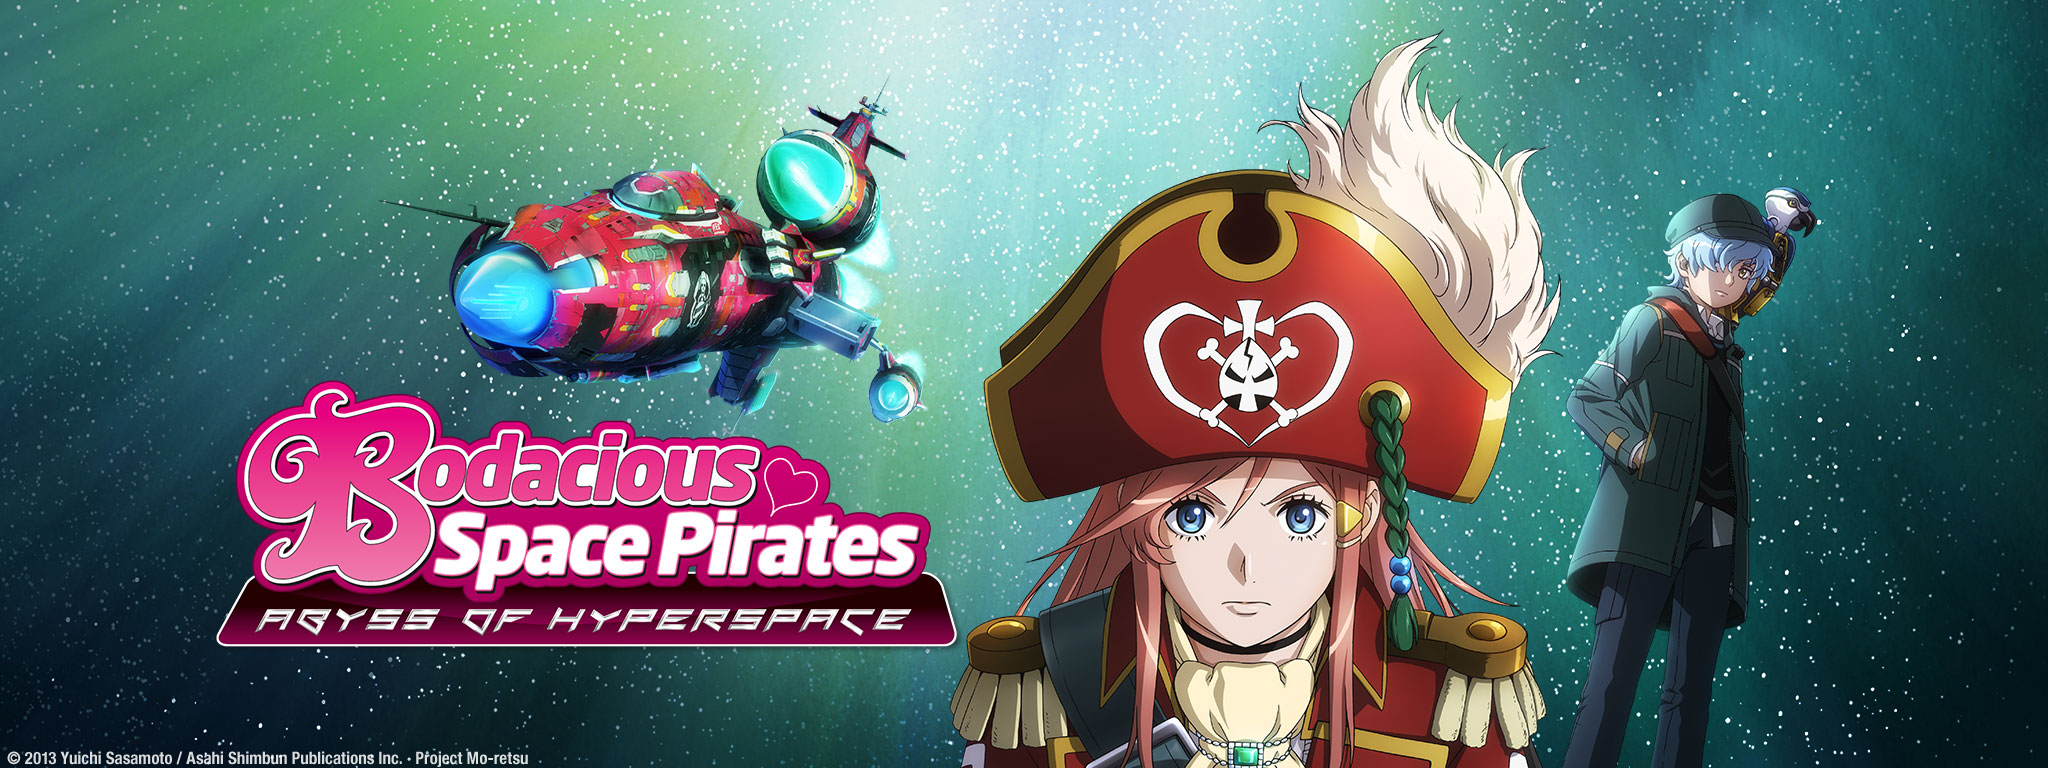 Title Art for Bodacious Space Pirates: Abyss of Hyperspace